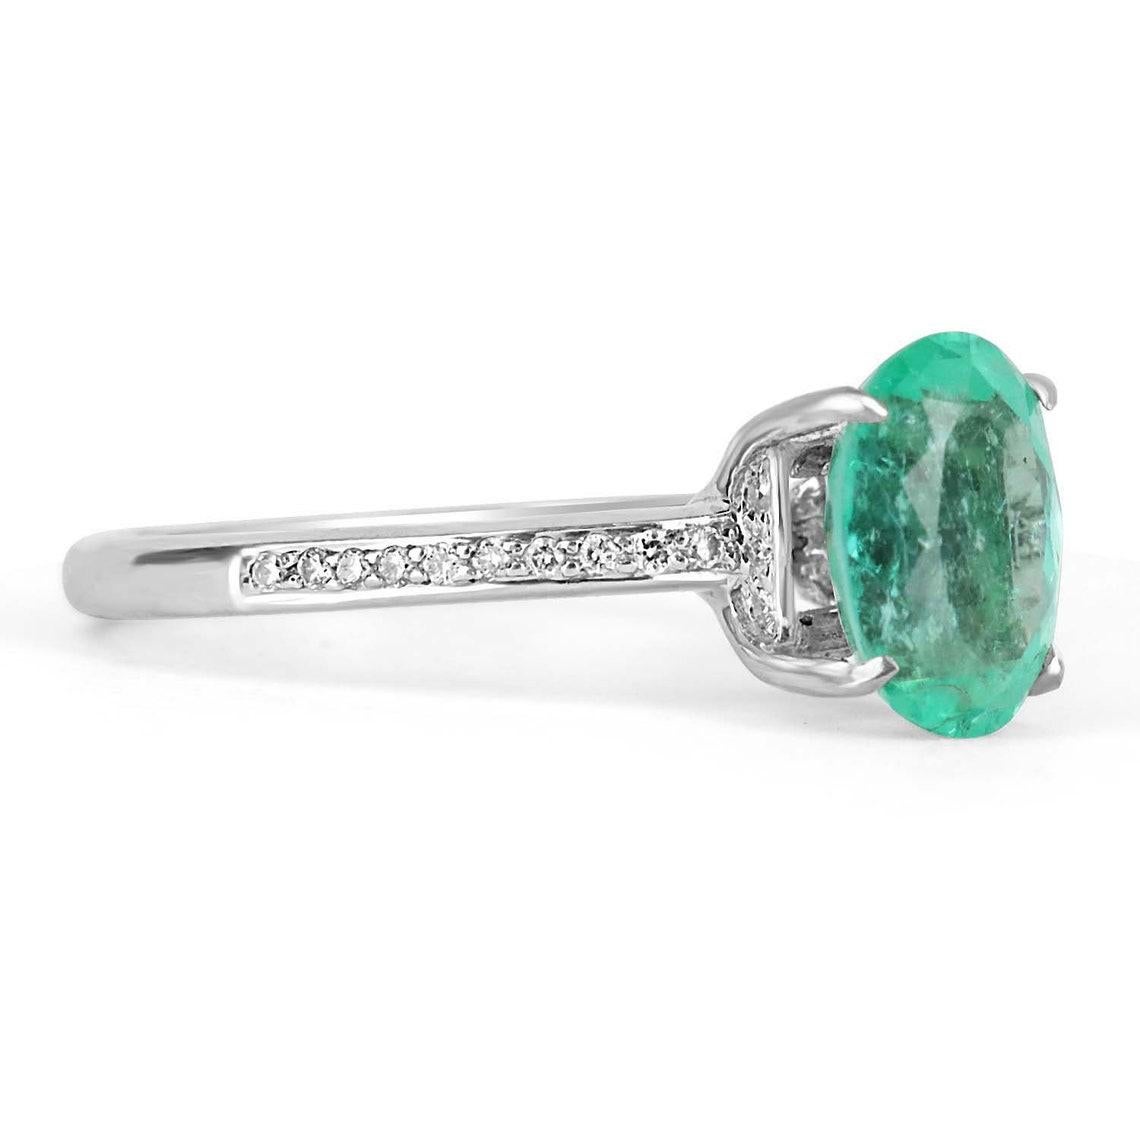 Elegantly displayed is a natural, emerald-cut Colombian emerald and diamond accent engagement ring. The center gem is a good quality, oval cut, emerald filled with life and brilliance! Among the emerald impressive qualities are its vibrant color and